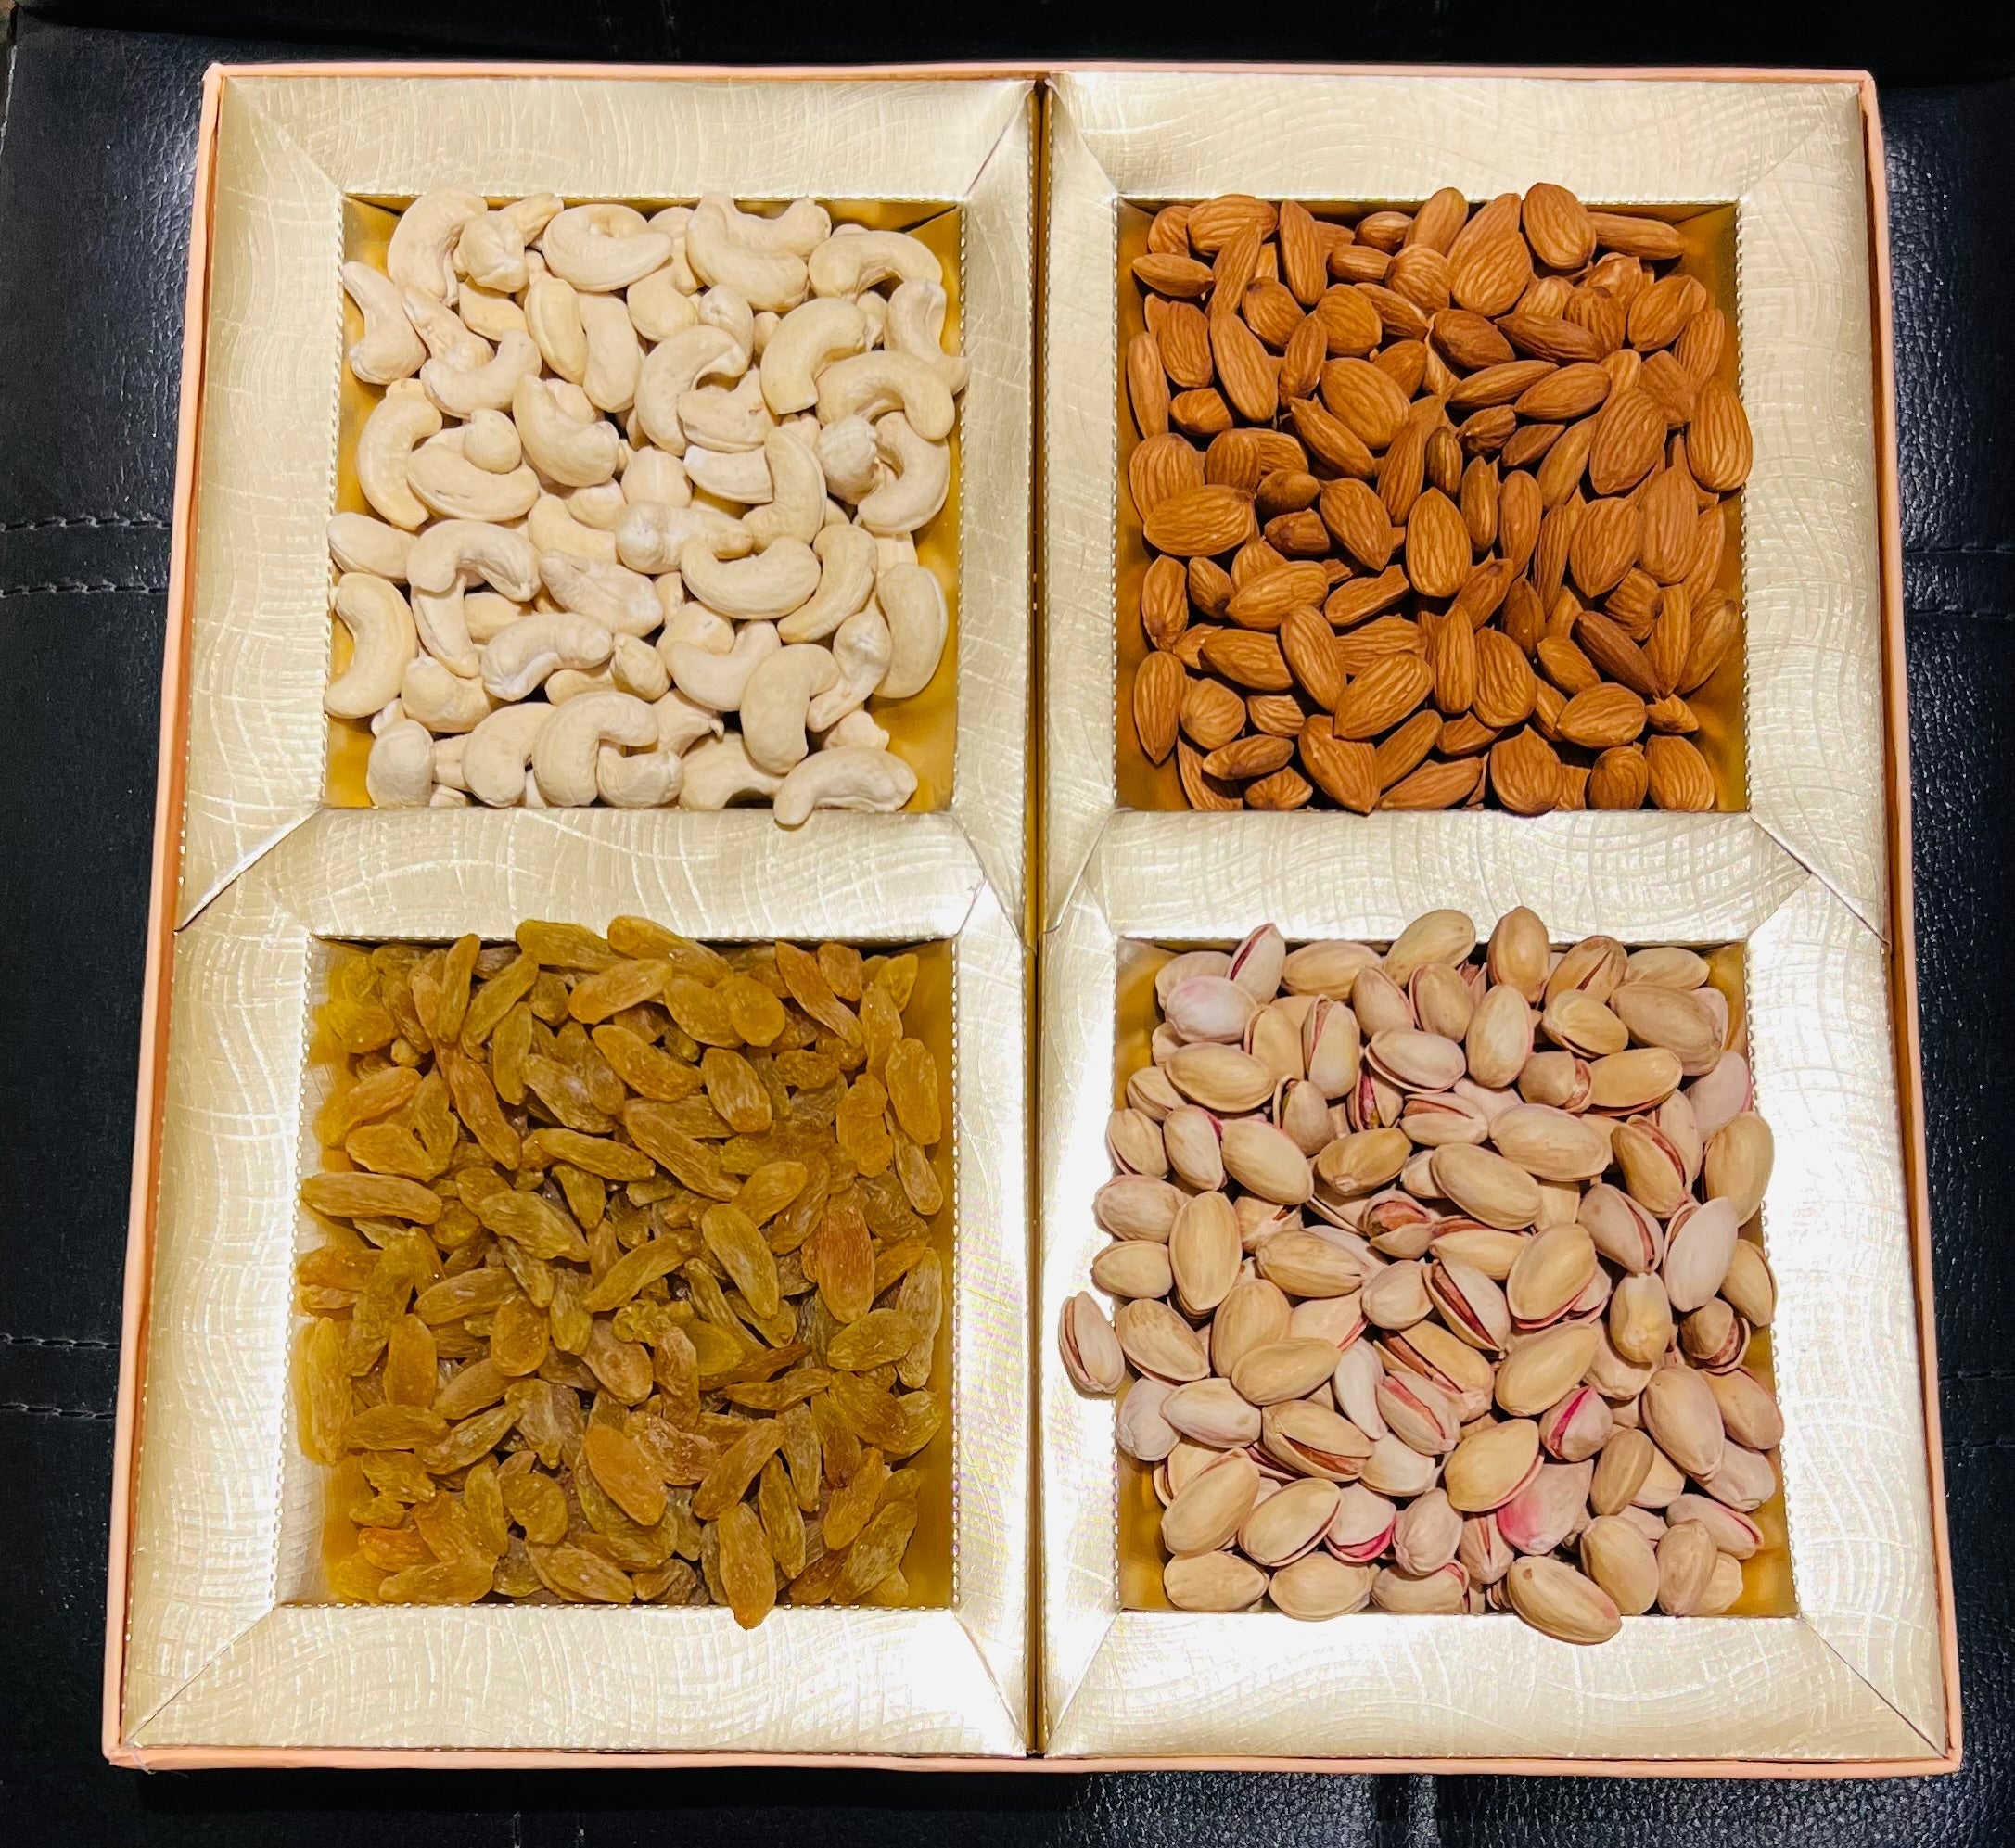 Dry Fruit Gift Box, 800gm Net Contents (Outer Cover Variable)